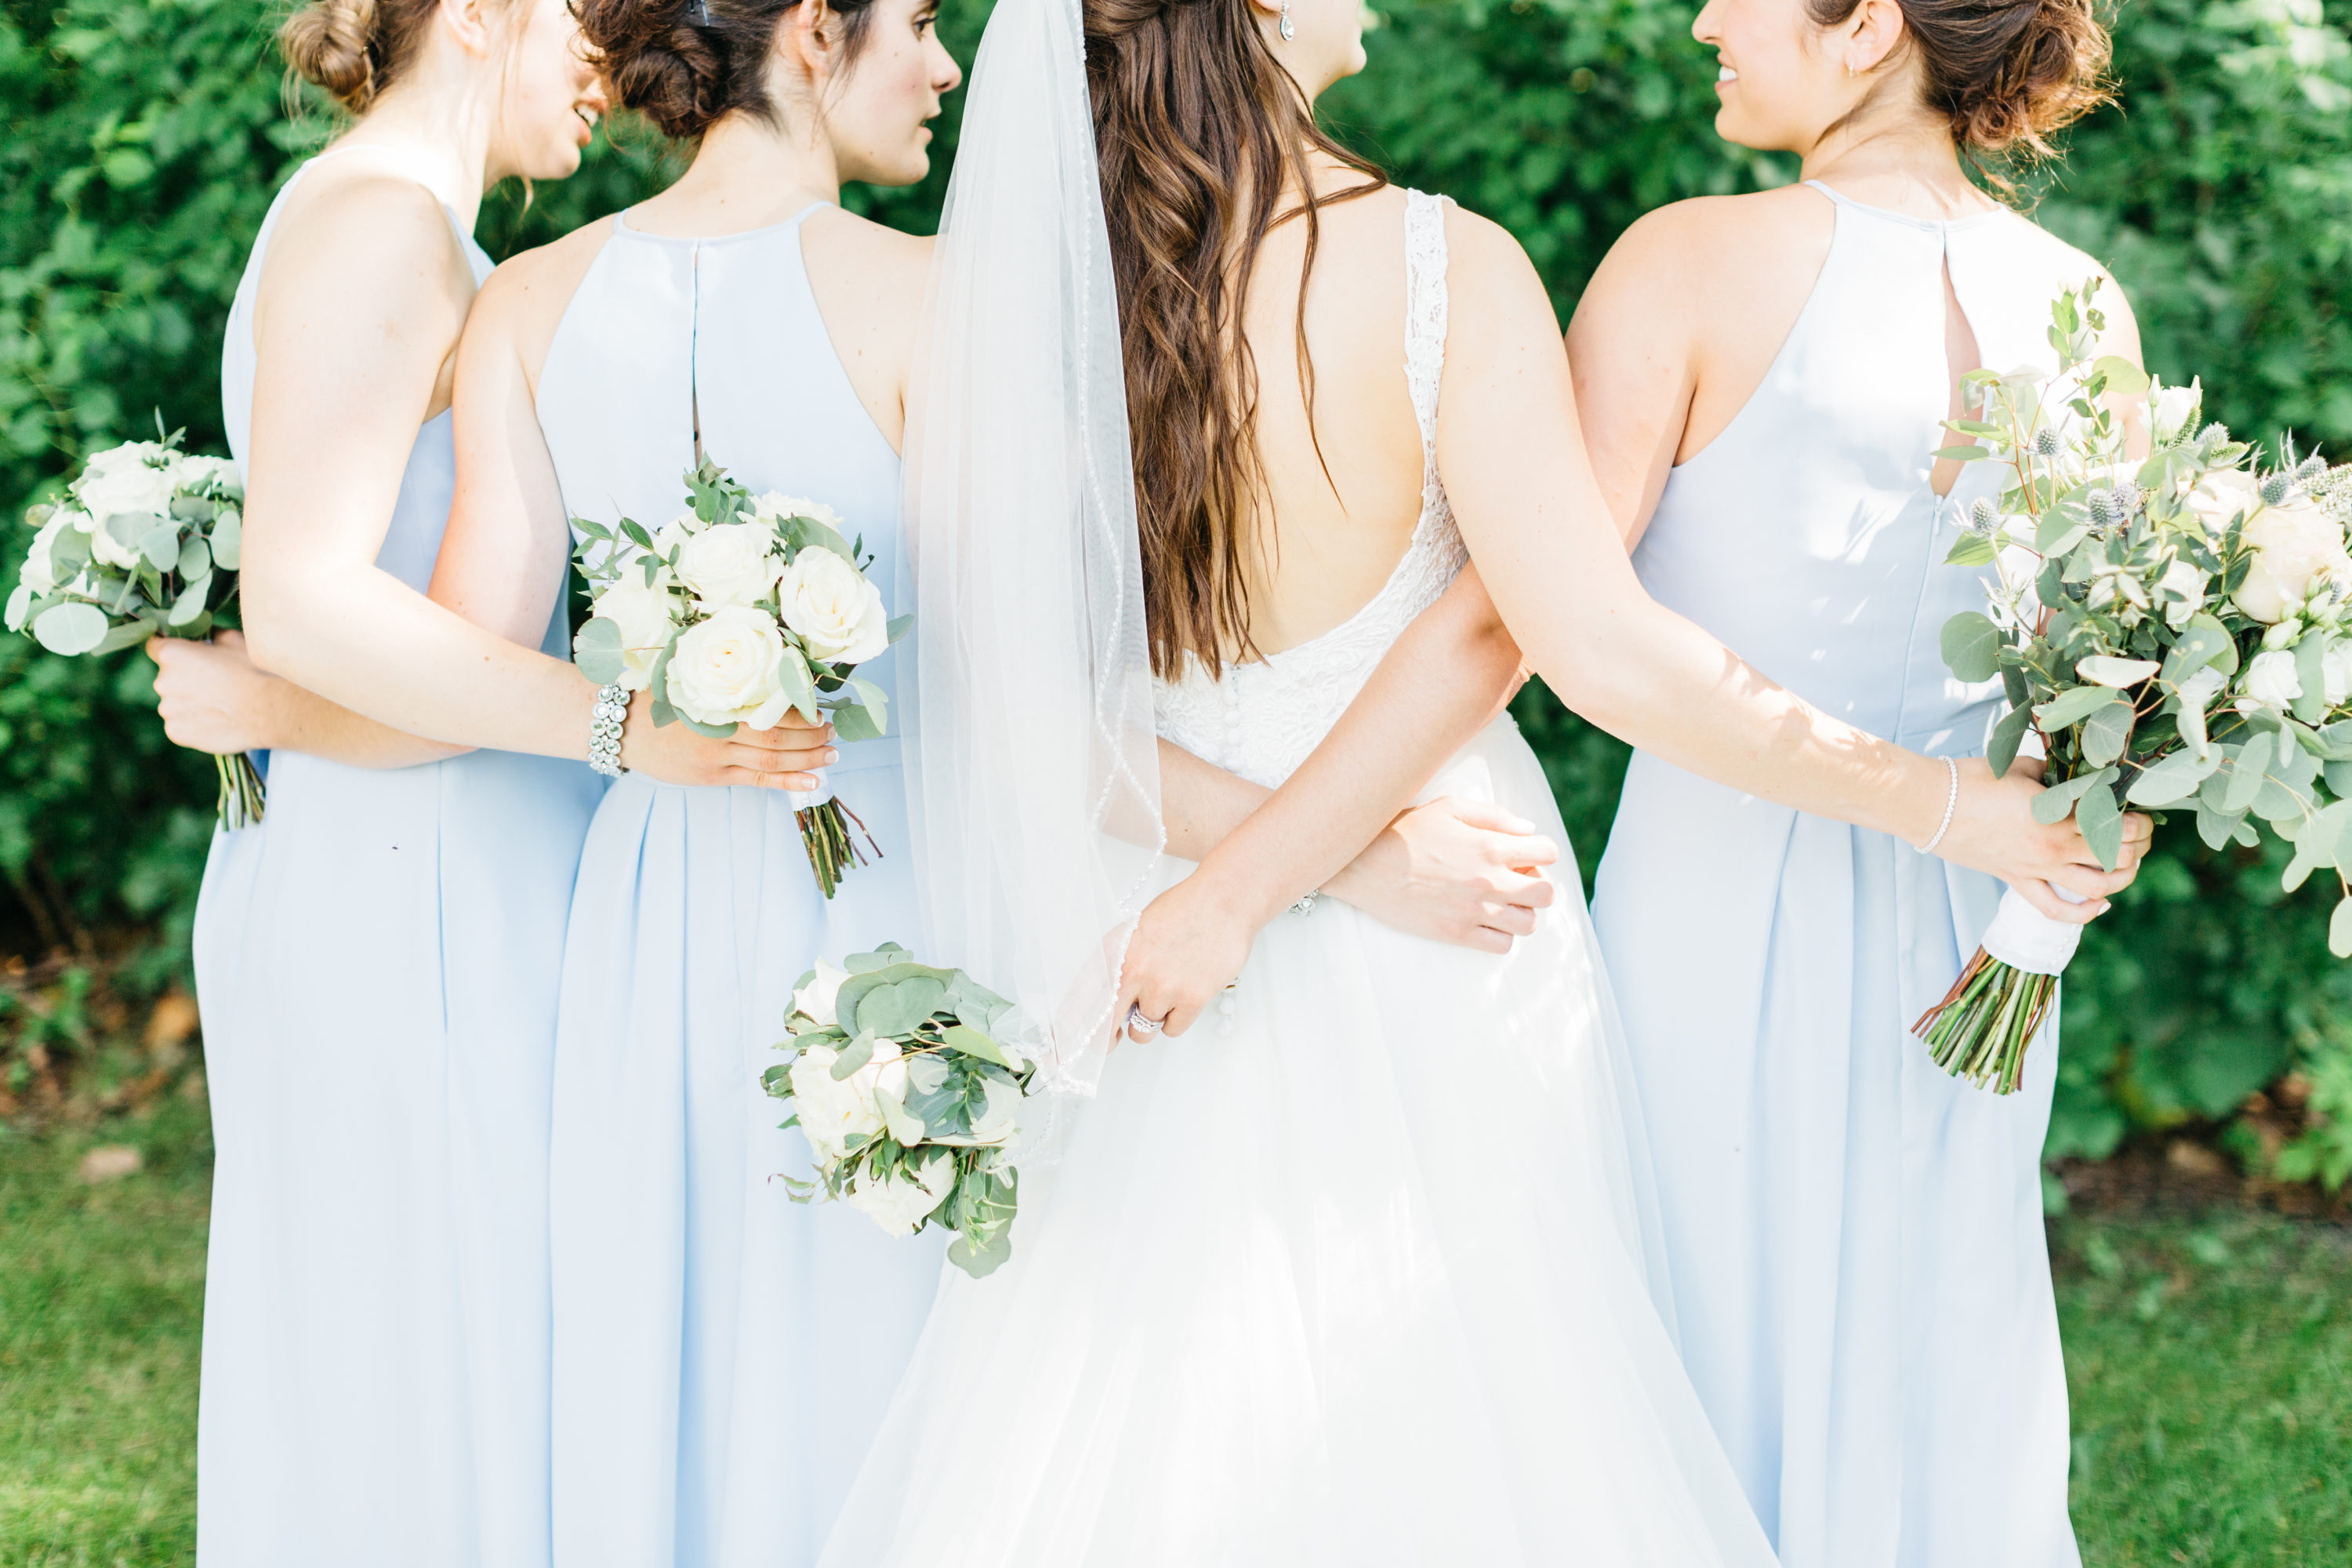 Detail shots of bride with bridesmaids